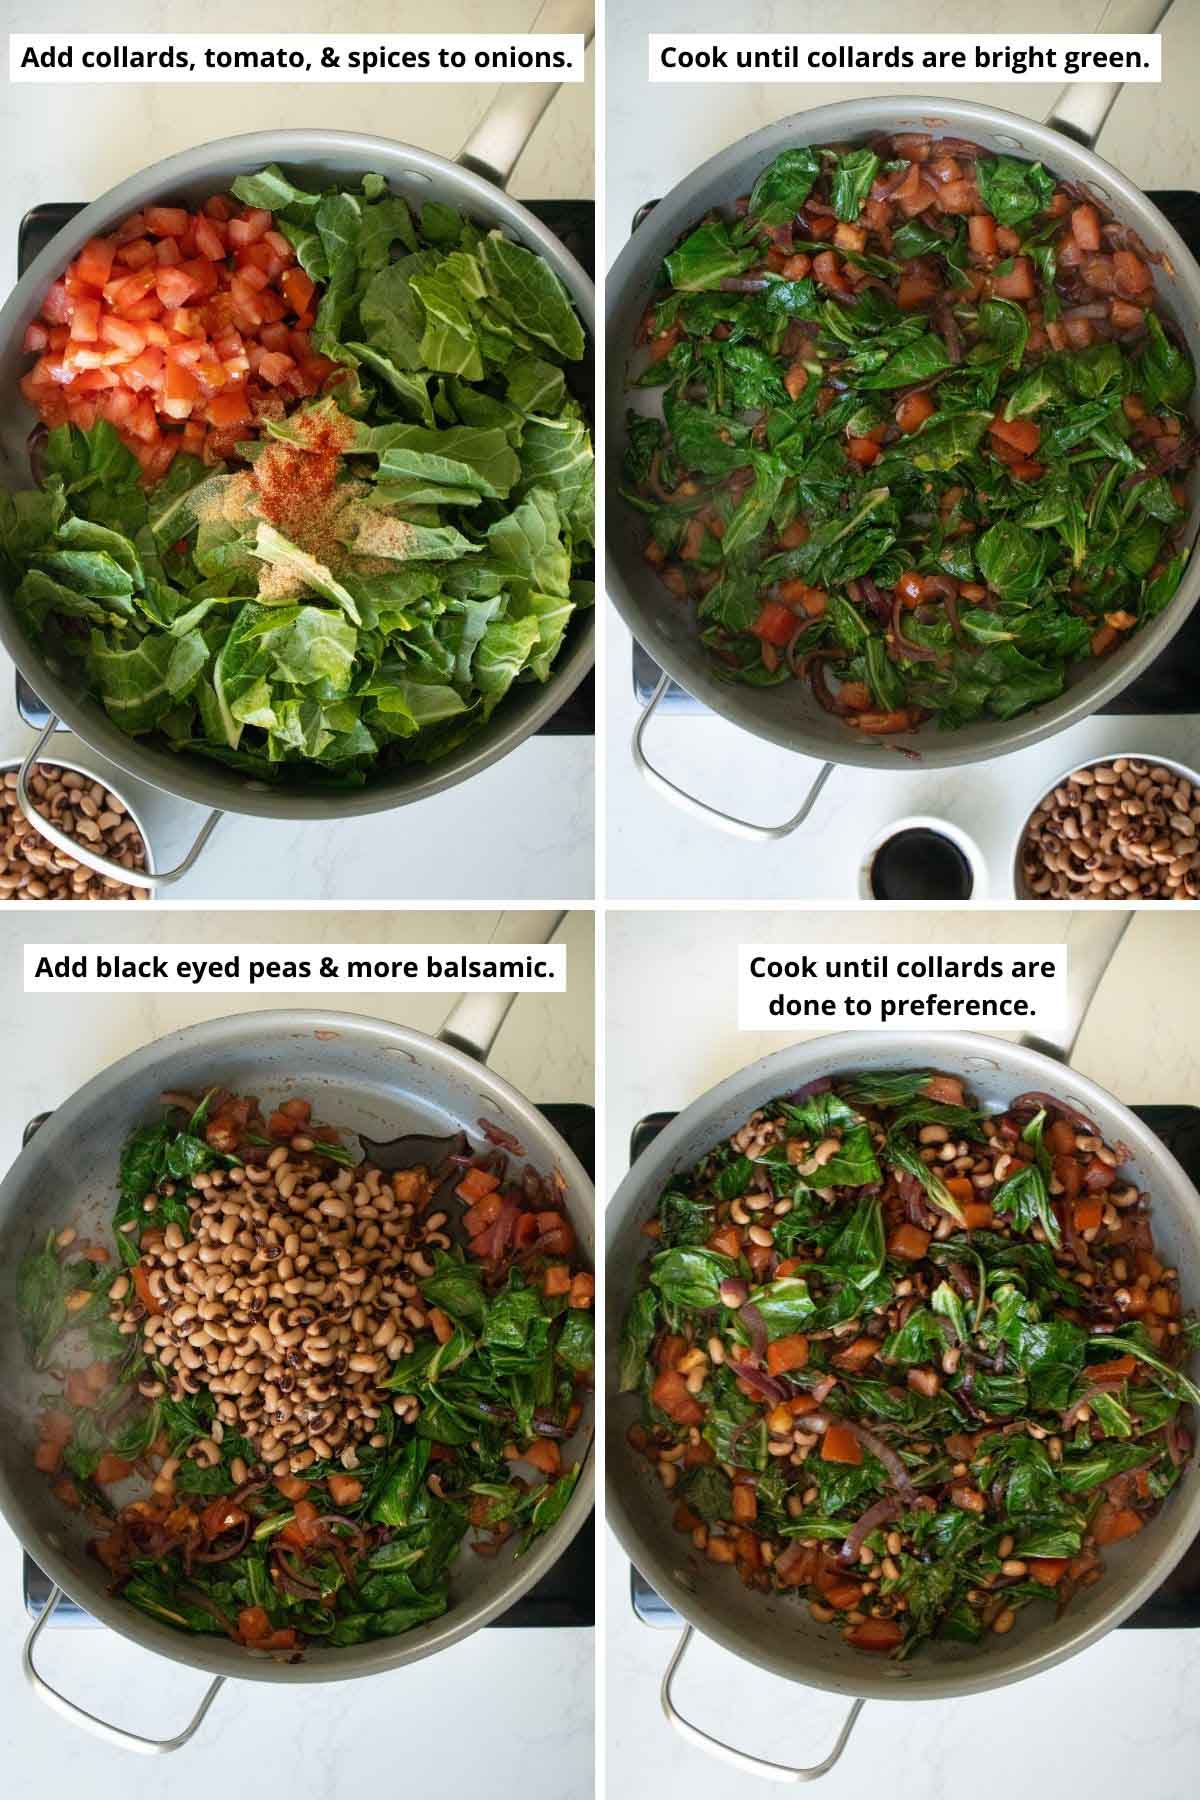 image collage showing the collards, tomatoes, and spices to the pan before and after cooking; adding the black eyed peas; and the finished dish